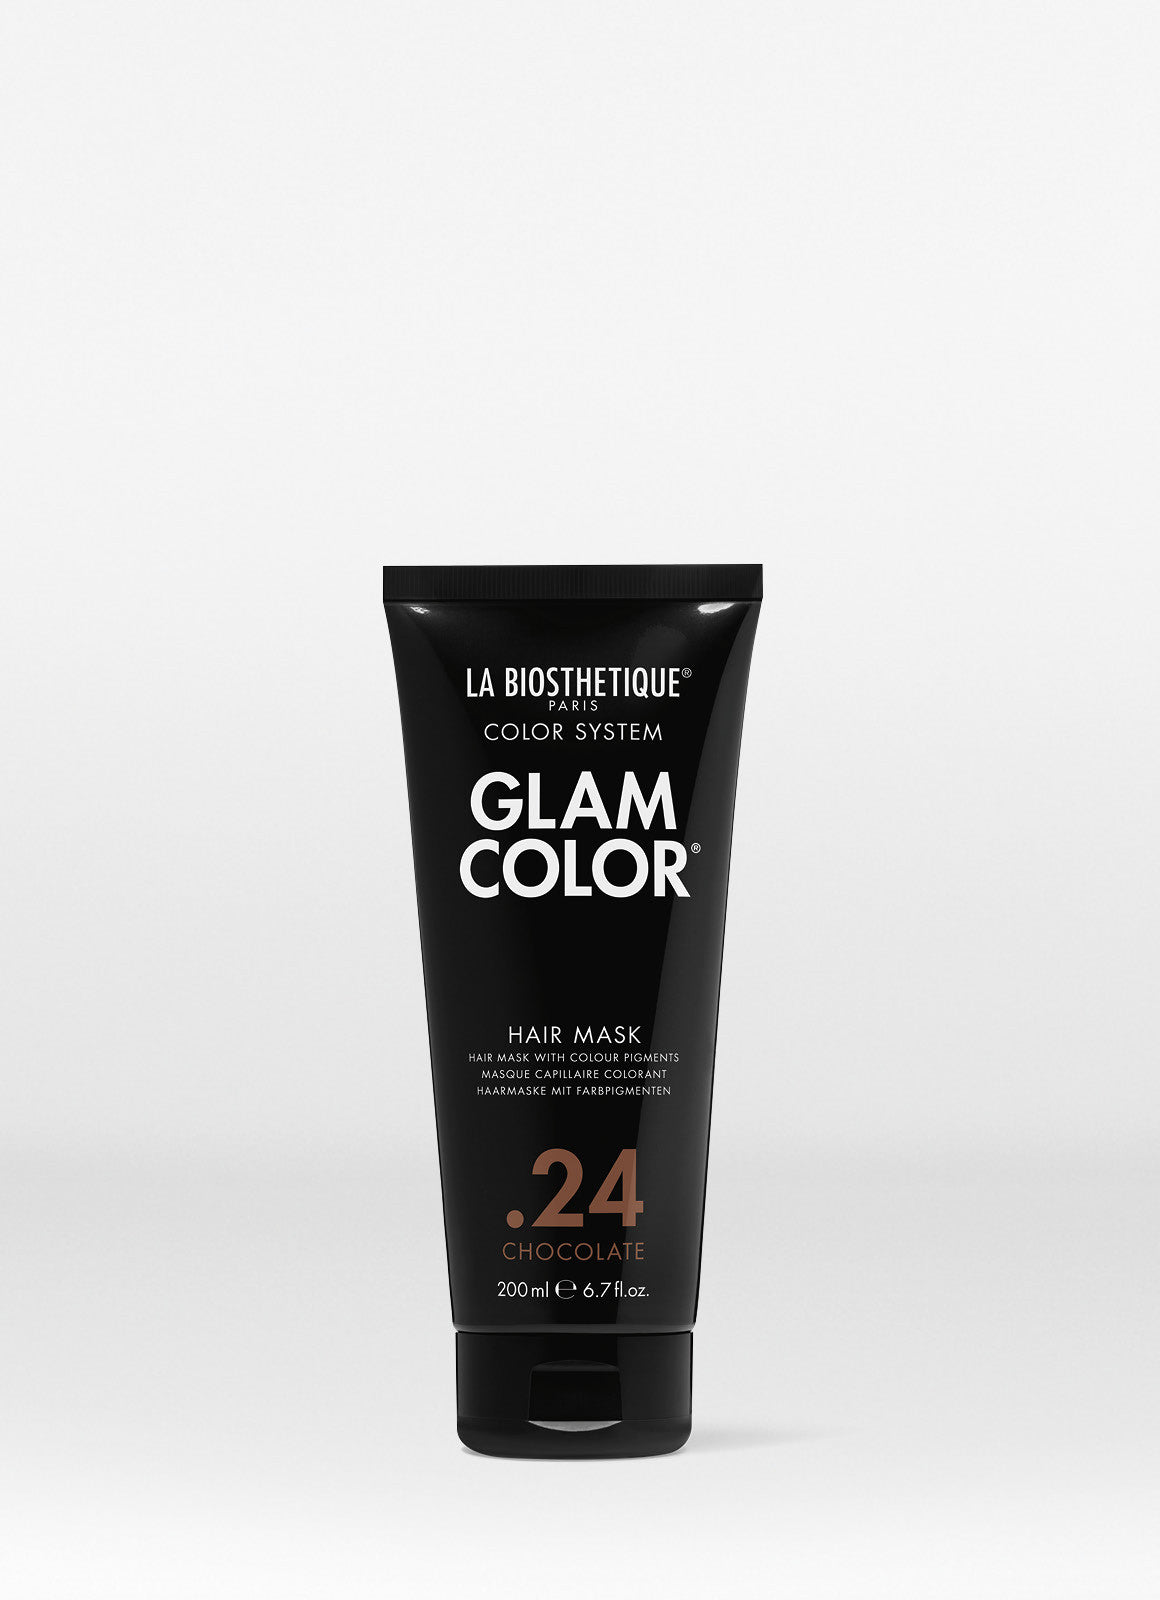 La Biosthetique Glam Color Hair Mask .24 Chocolate 200ml - shelley and co